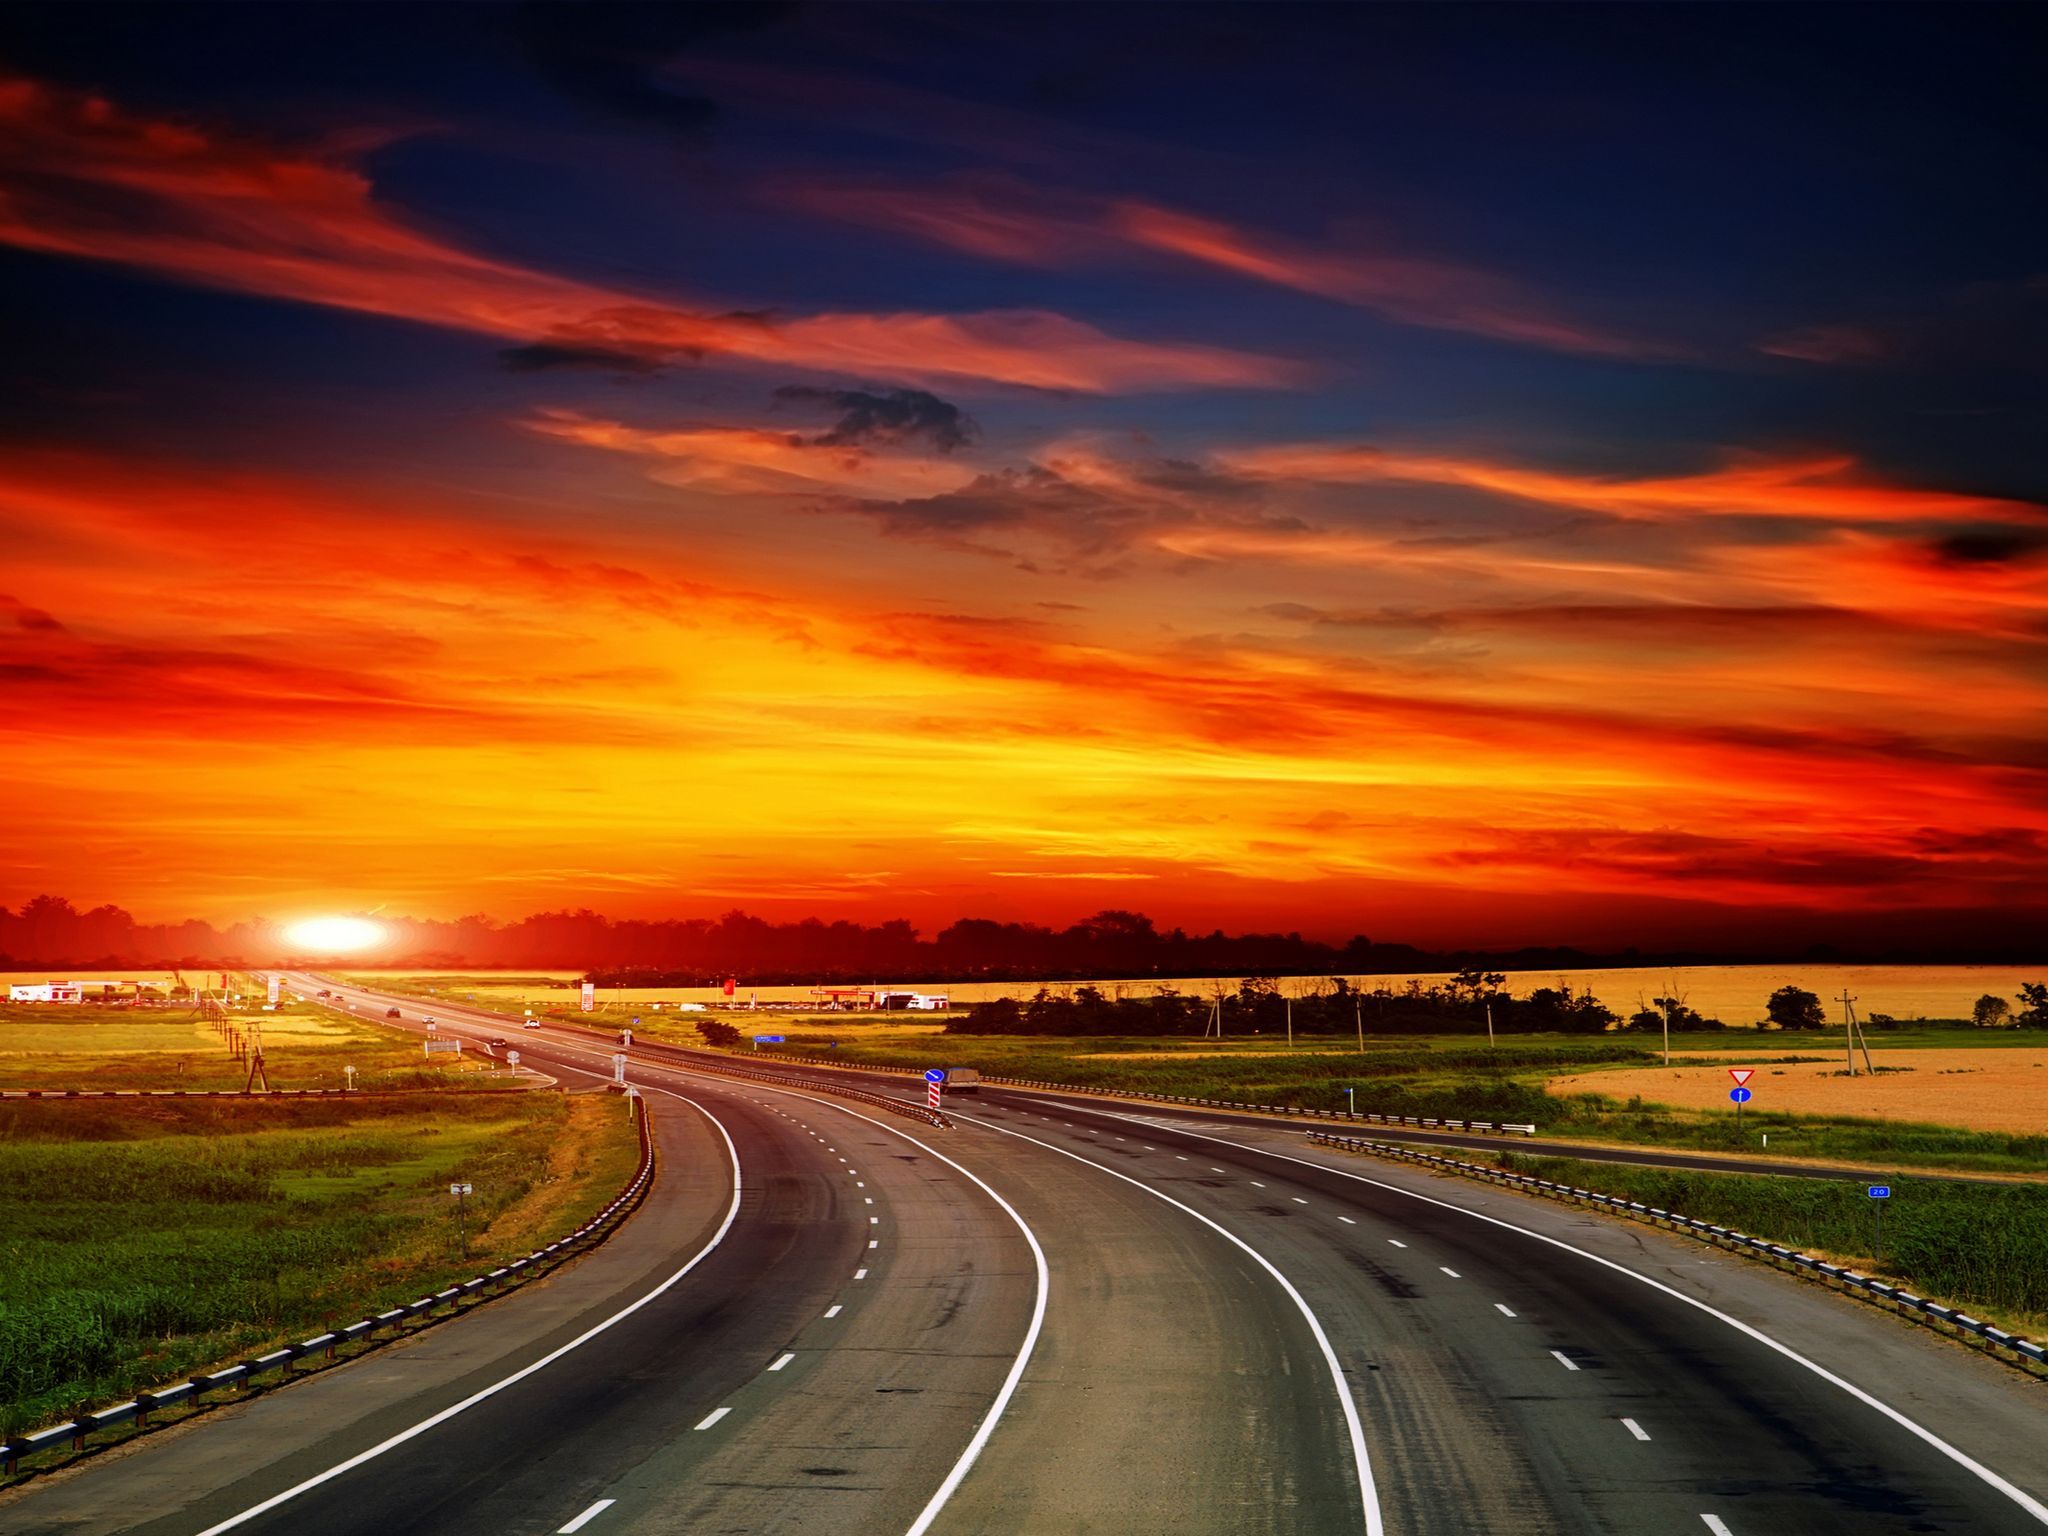 Amazing Sunset Image Road Afternoon Awesome